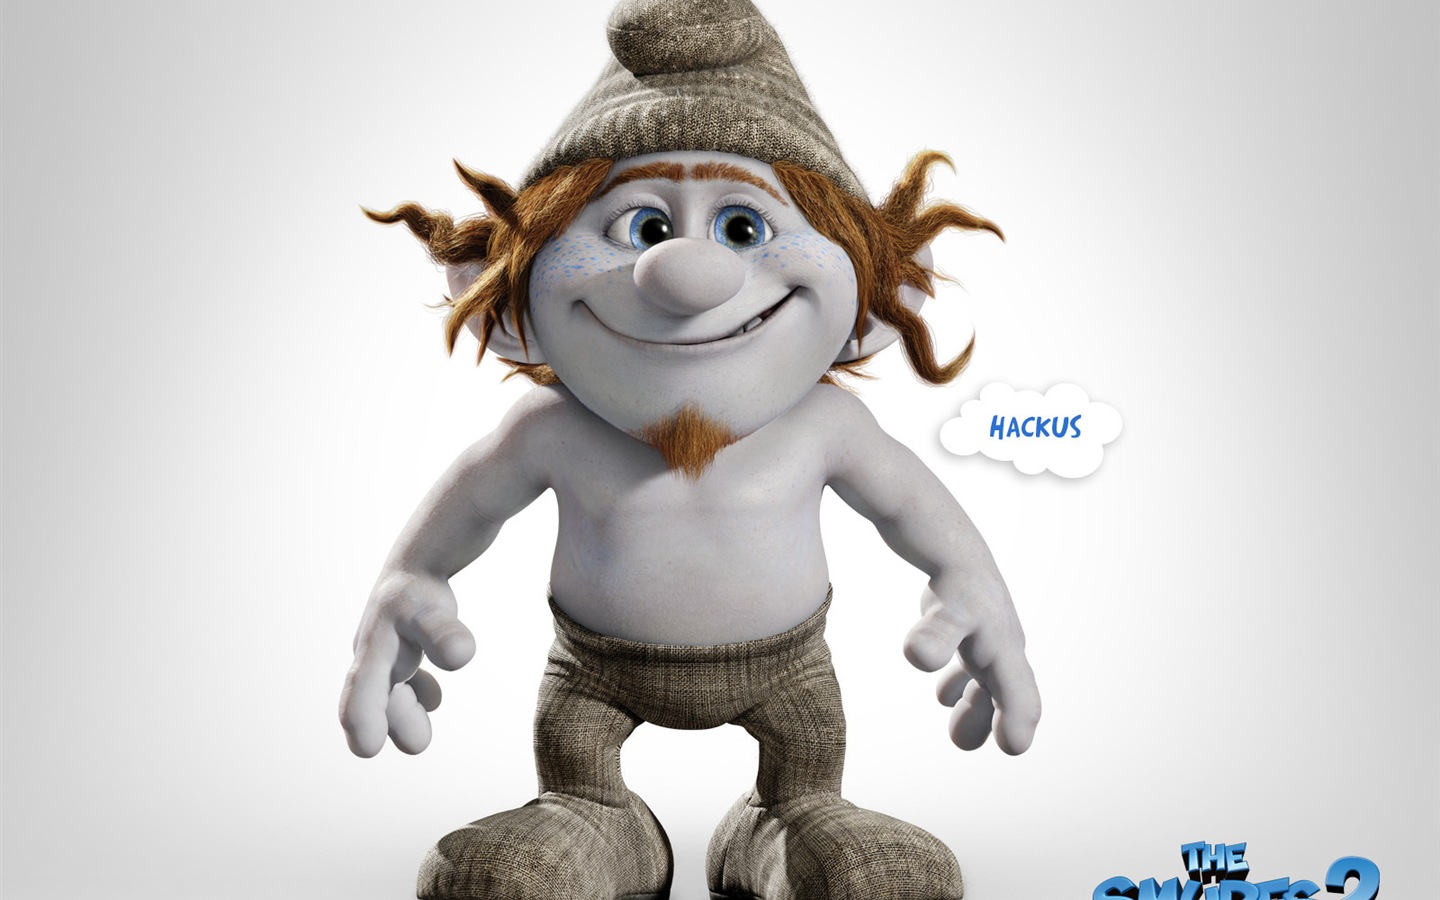 The Smurfs 2 HD movie wallpapers #9 - 1440x900